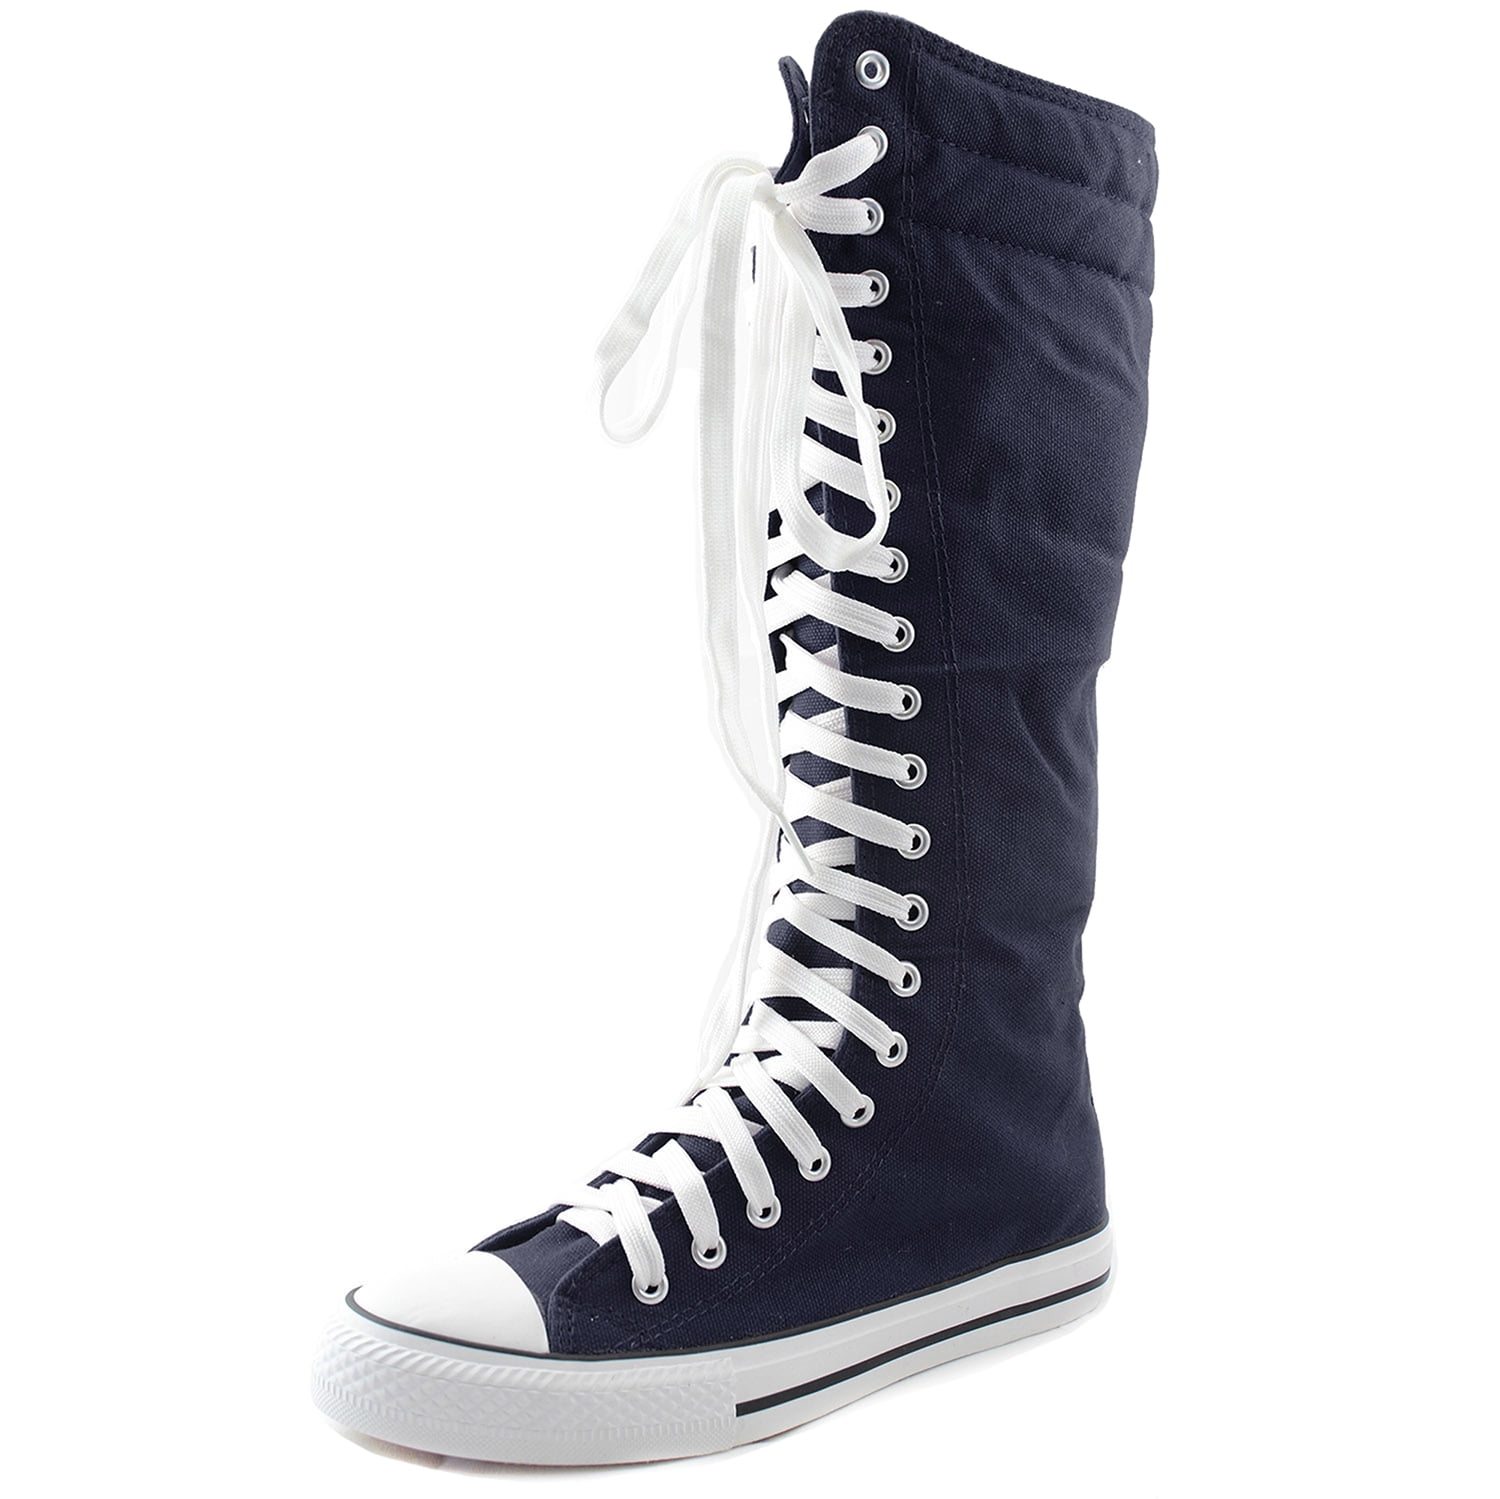 DailyShoes Women's Sneaker Boots Boot 